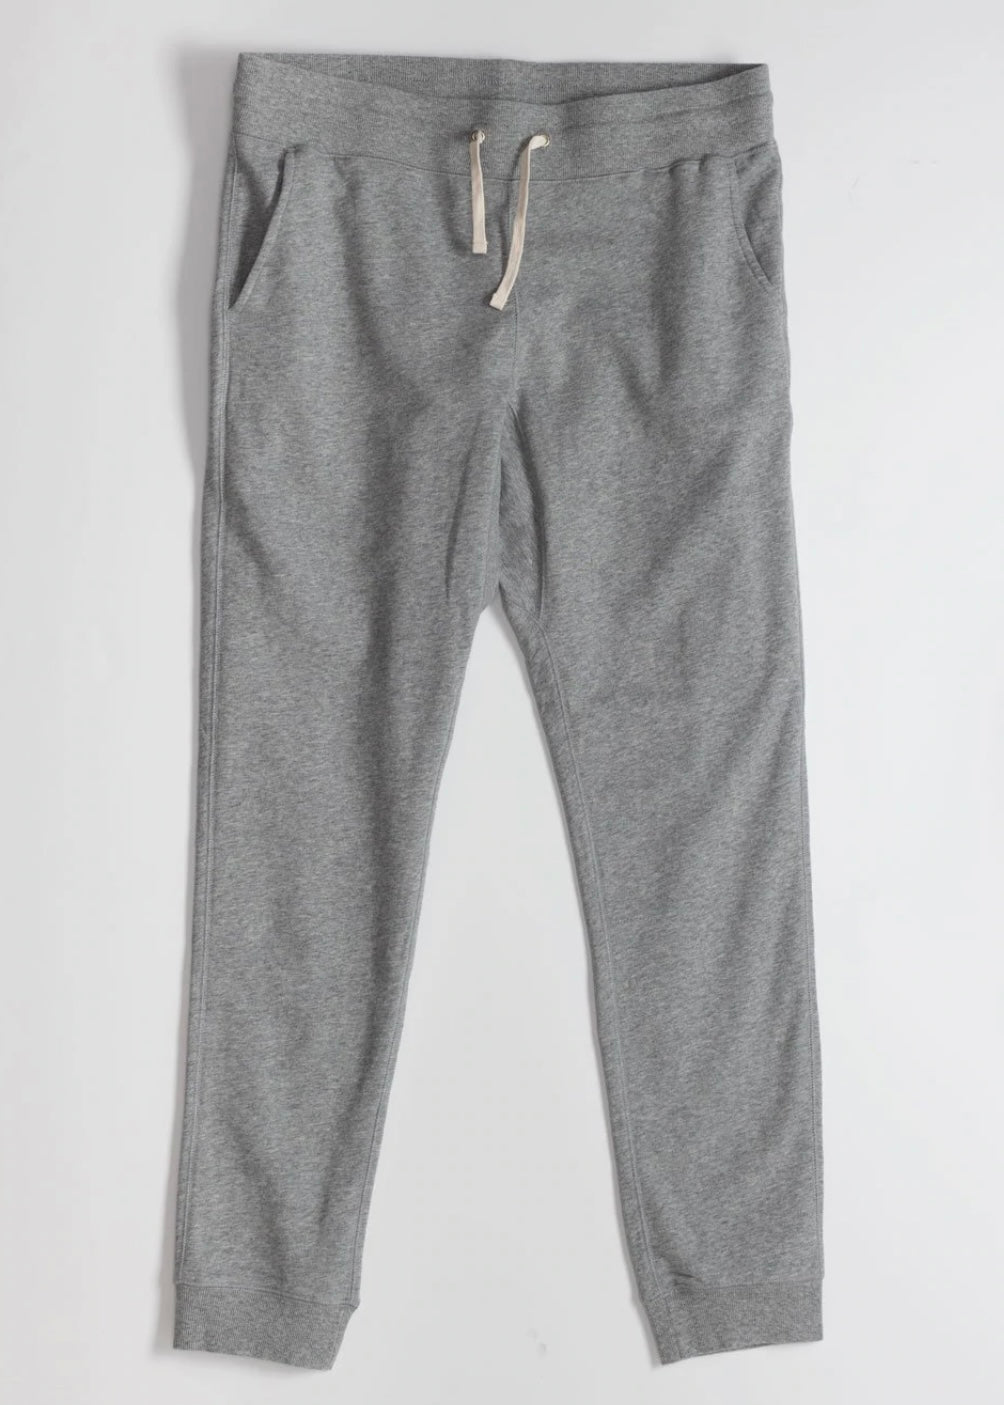 French Terry Sweatpants in Black and Melange Grey